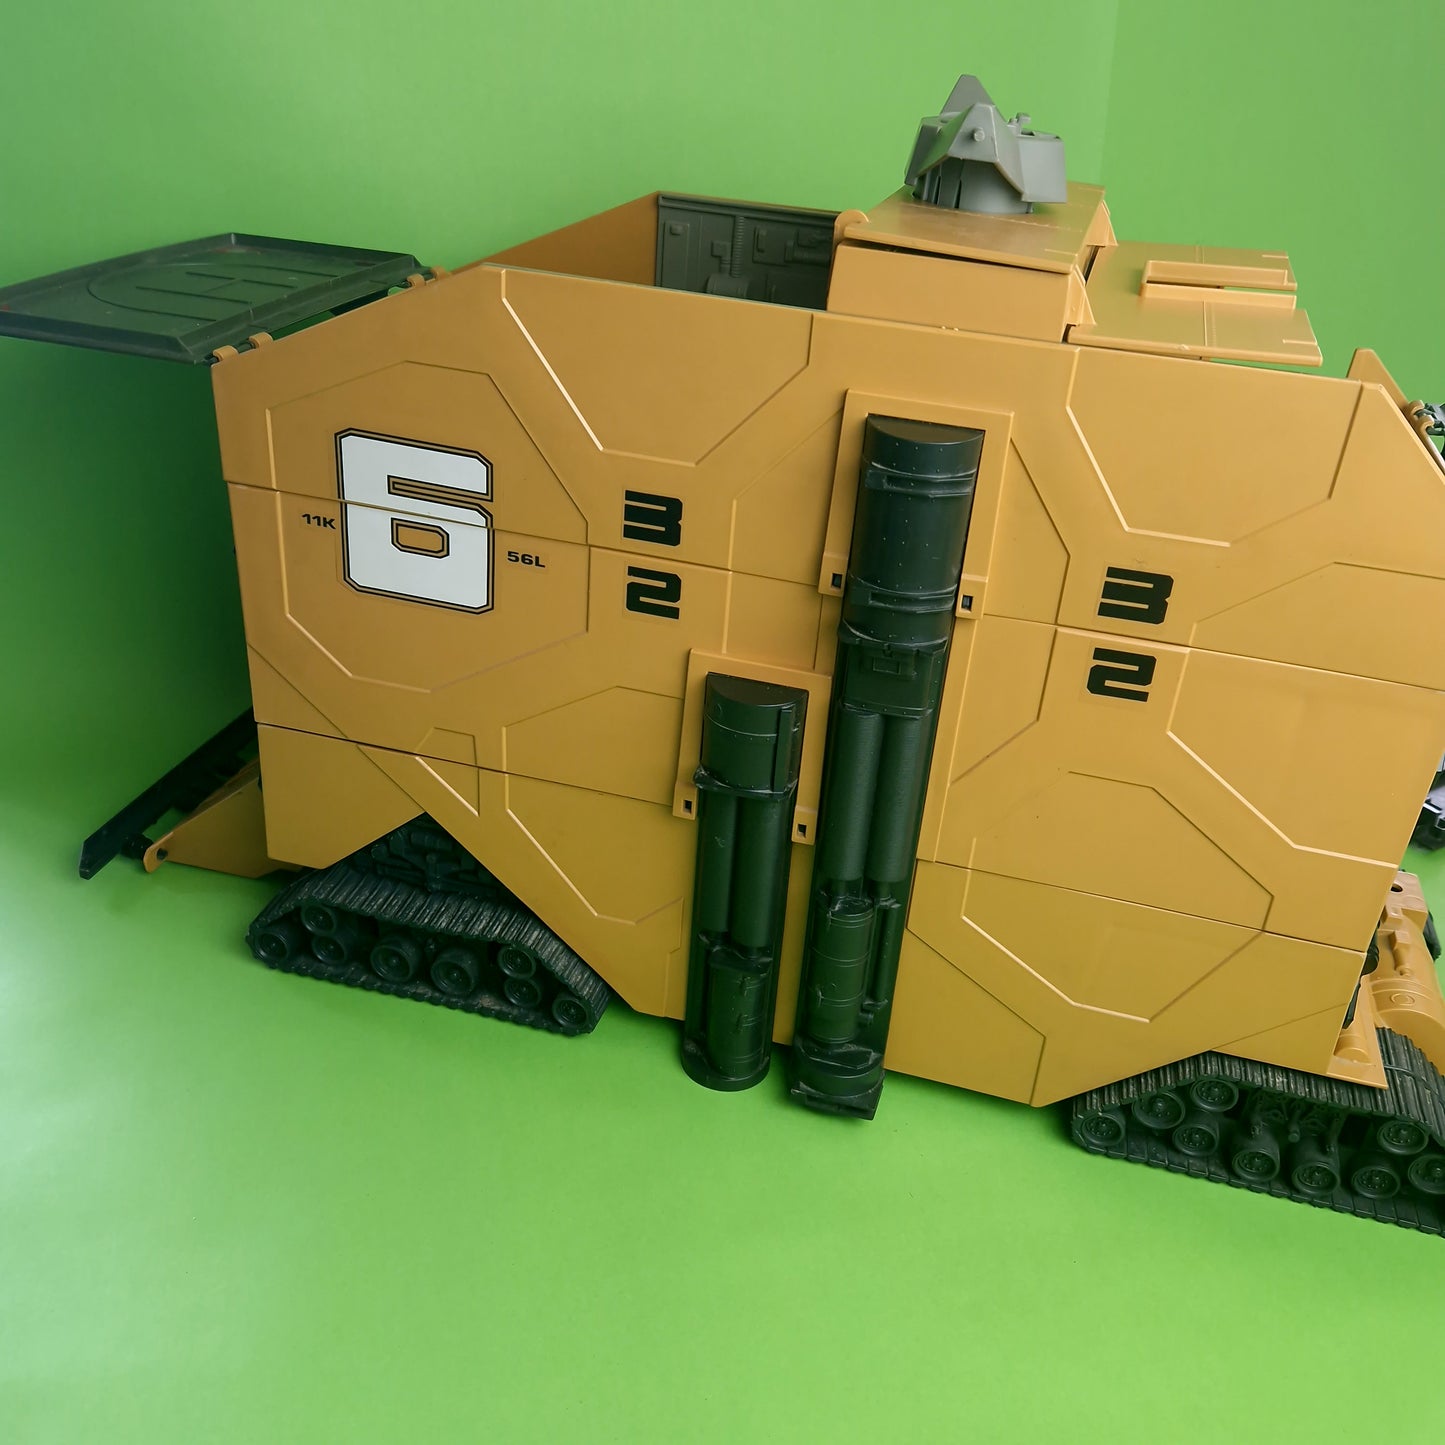 ACTION FORCE ☆ MOBILE COMMAND CENTRE with STEAM ROLLER Action Figure ☆ Vintage G.I Joe Hasbro 1987